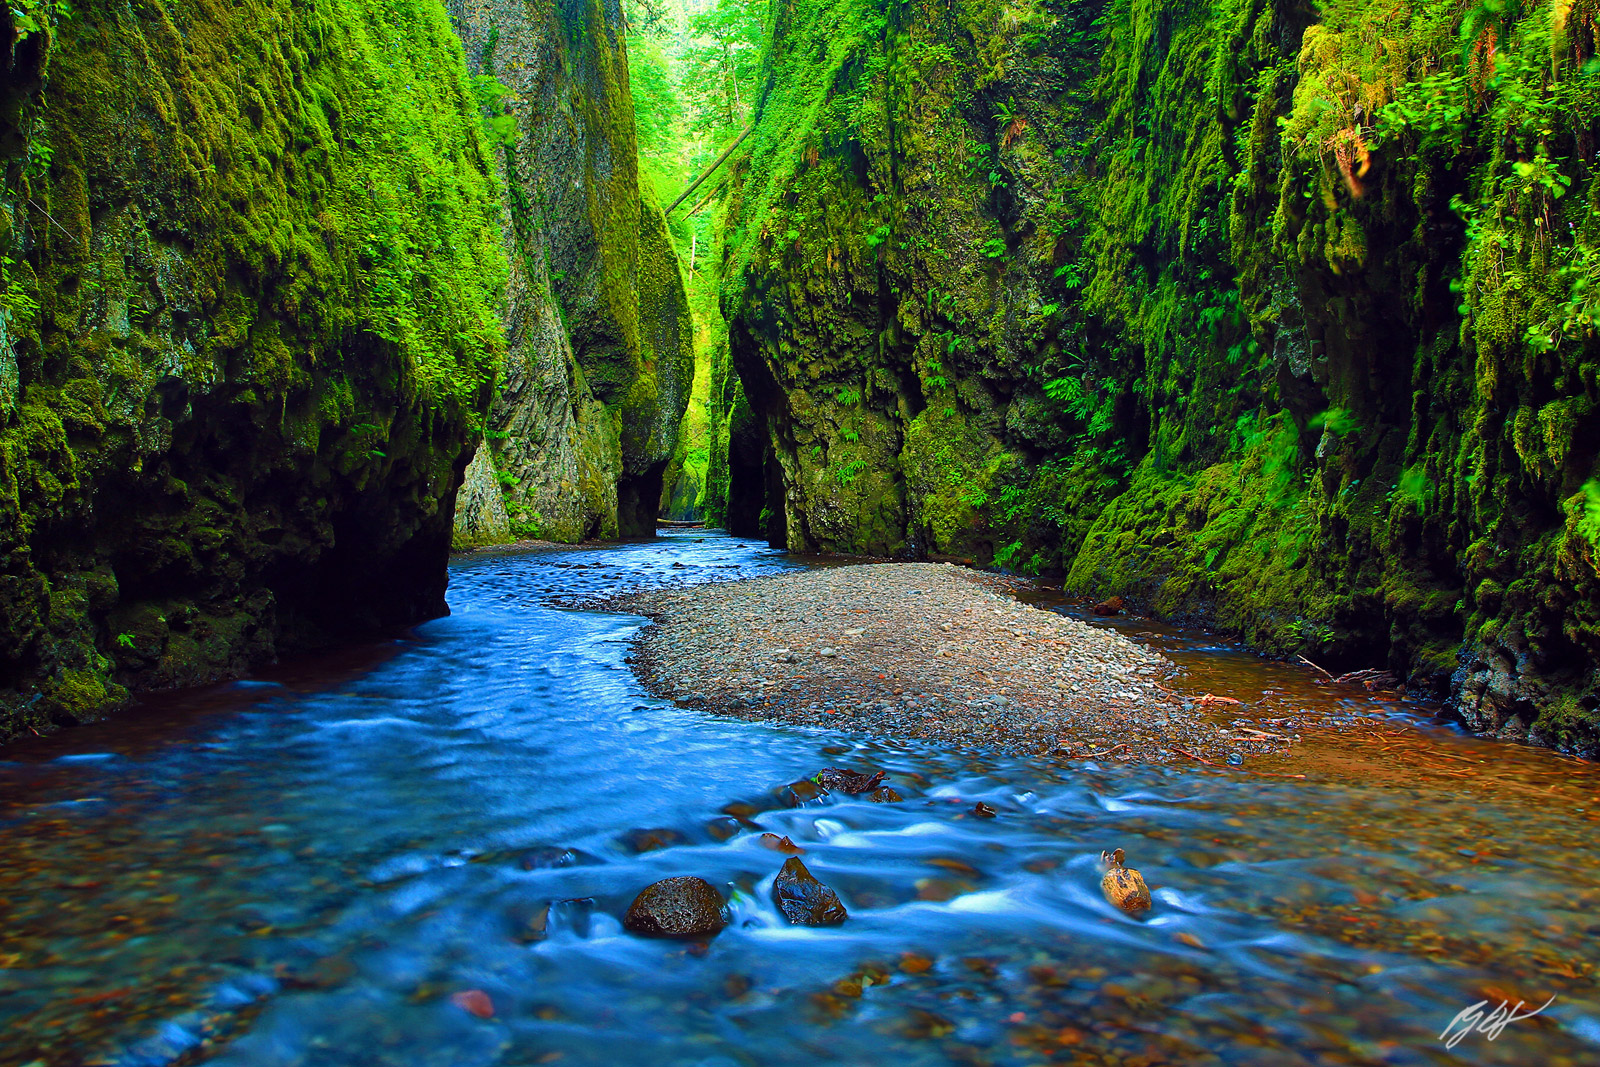 Oneonta Gorge in the Columbia River Gorge National Scenic Area in Oregon